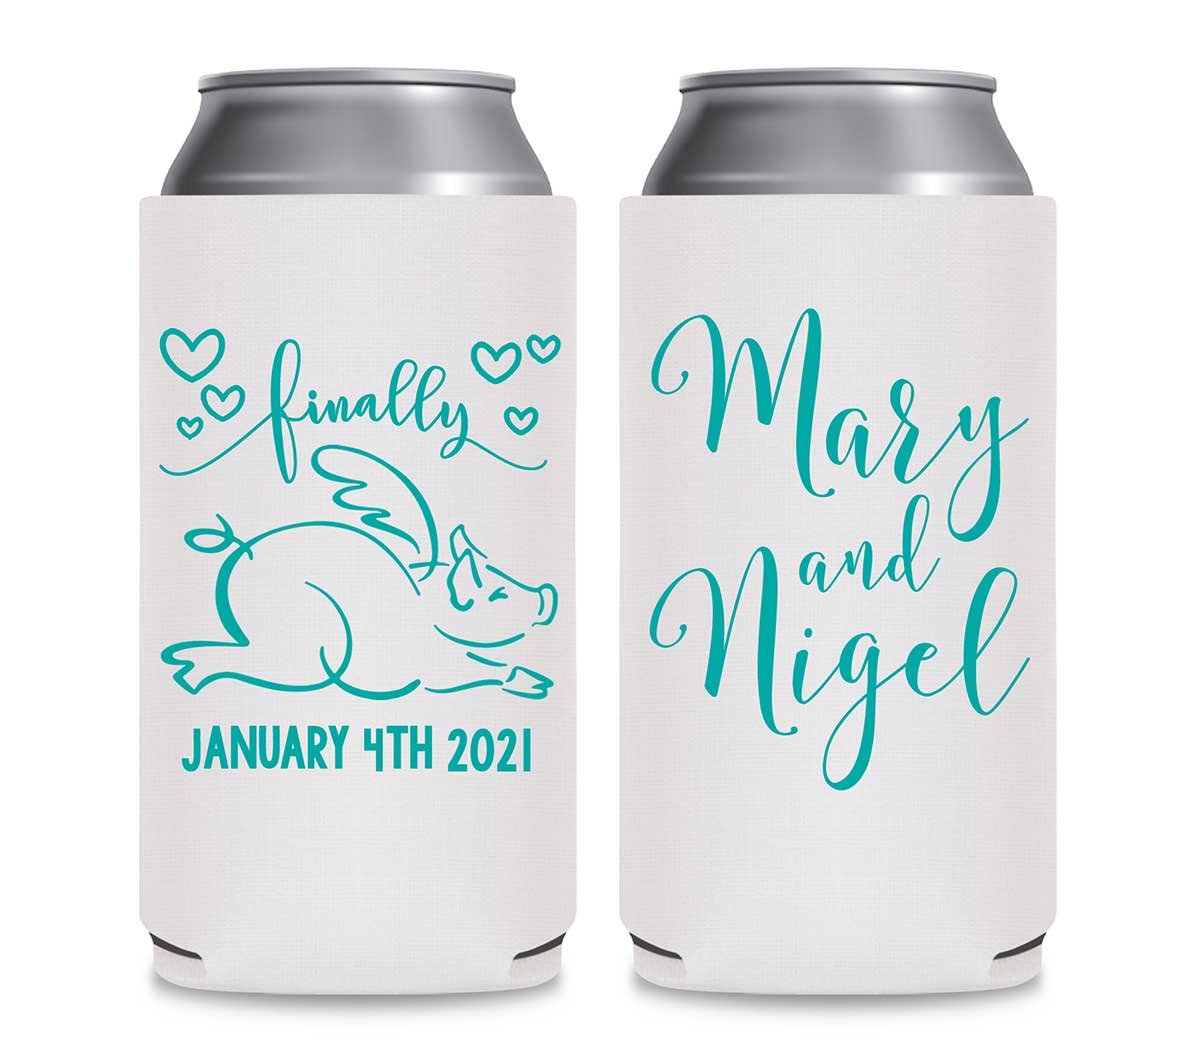 Finally 1A When Pigs Fly Foldable 12 oz Slim Can Koozies Wedding Gifts for Guests